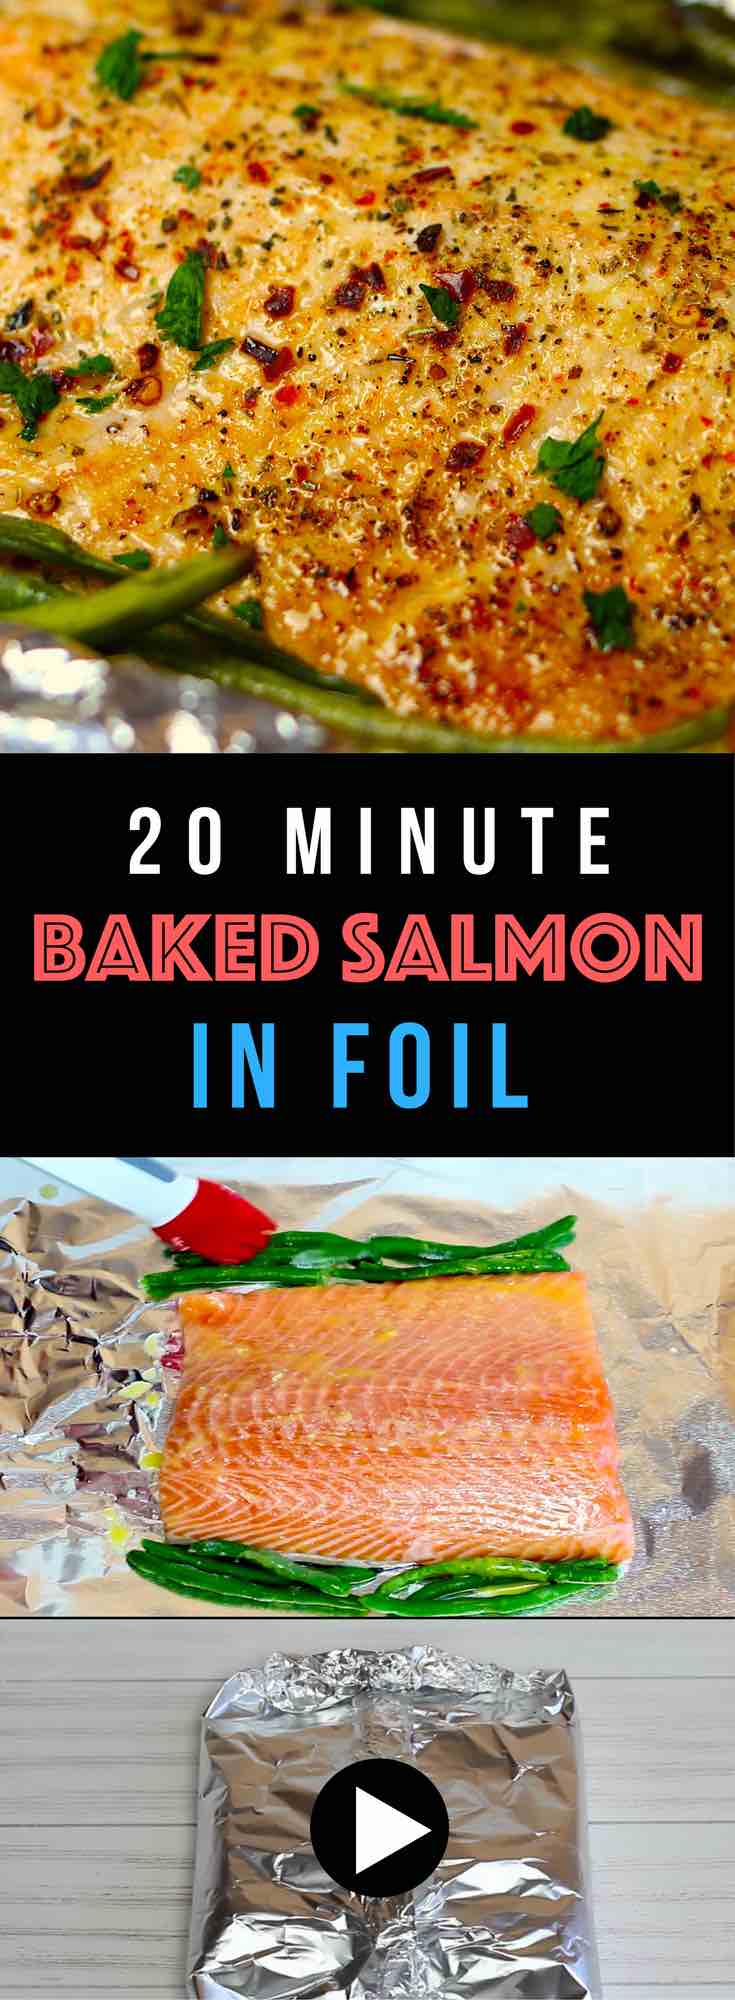 Healthy and easiest dinner ever! Salmon and green beans are baked in foil, which makes it moist, tender, and flakey. Plus clean up is a breeze! Only a few simple ingredients needed: Salmon, green beans, butter, lemon juice, Italian seasoning, salt & pepper, red pepper flakes and parsley for garnishing. Healthy, Quick and Easy recipe. Video recipe. | Tipbuzz.com 